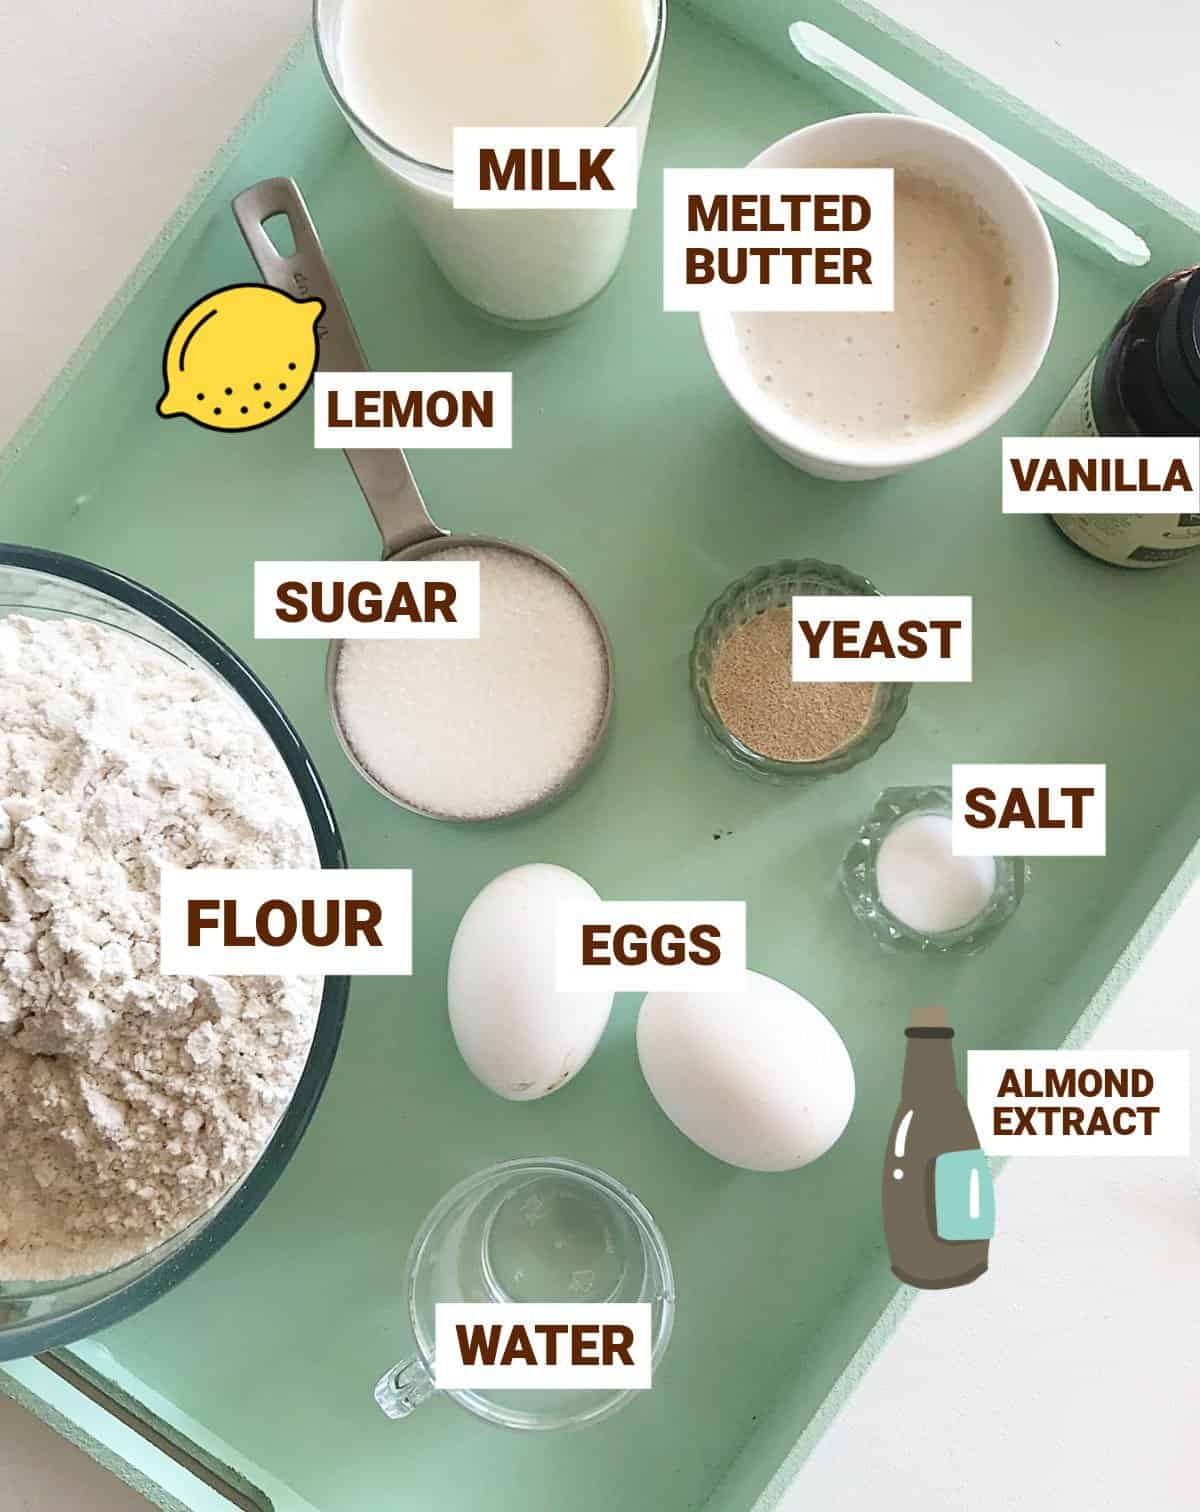 Green tray with bowls of ingredients including flour, milk, sugar, eggs, yeast, lemon, vanilla, butter.